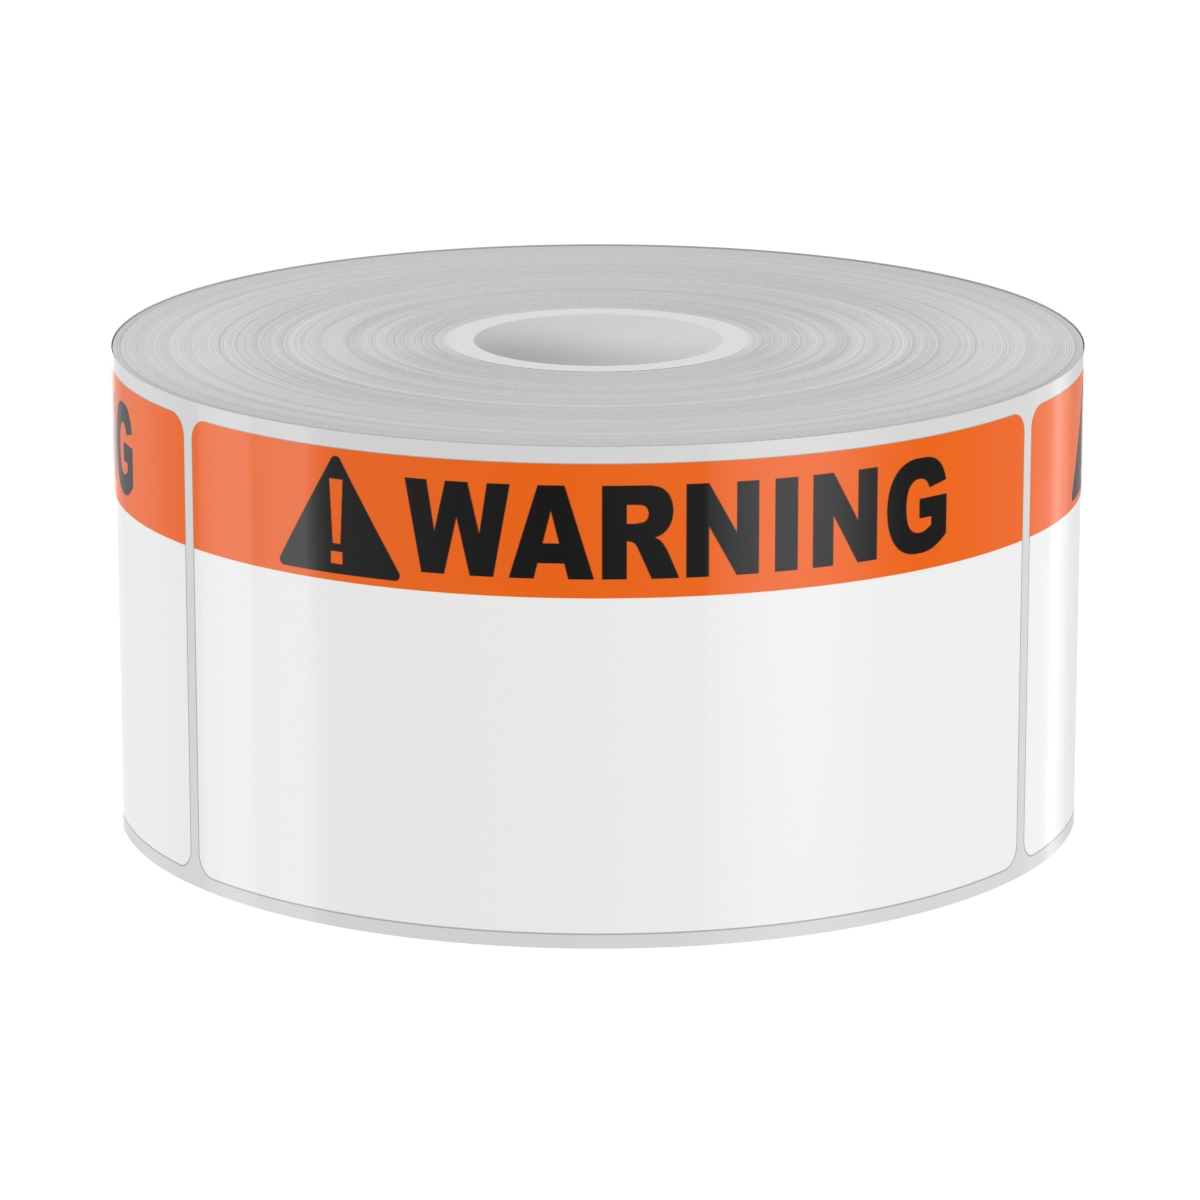 250 2in x 4in High-Performance Orange Band with Black Warning